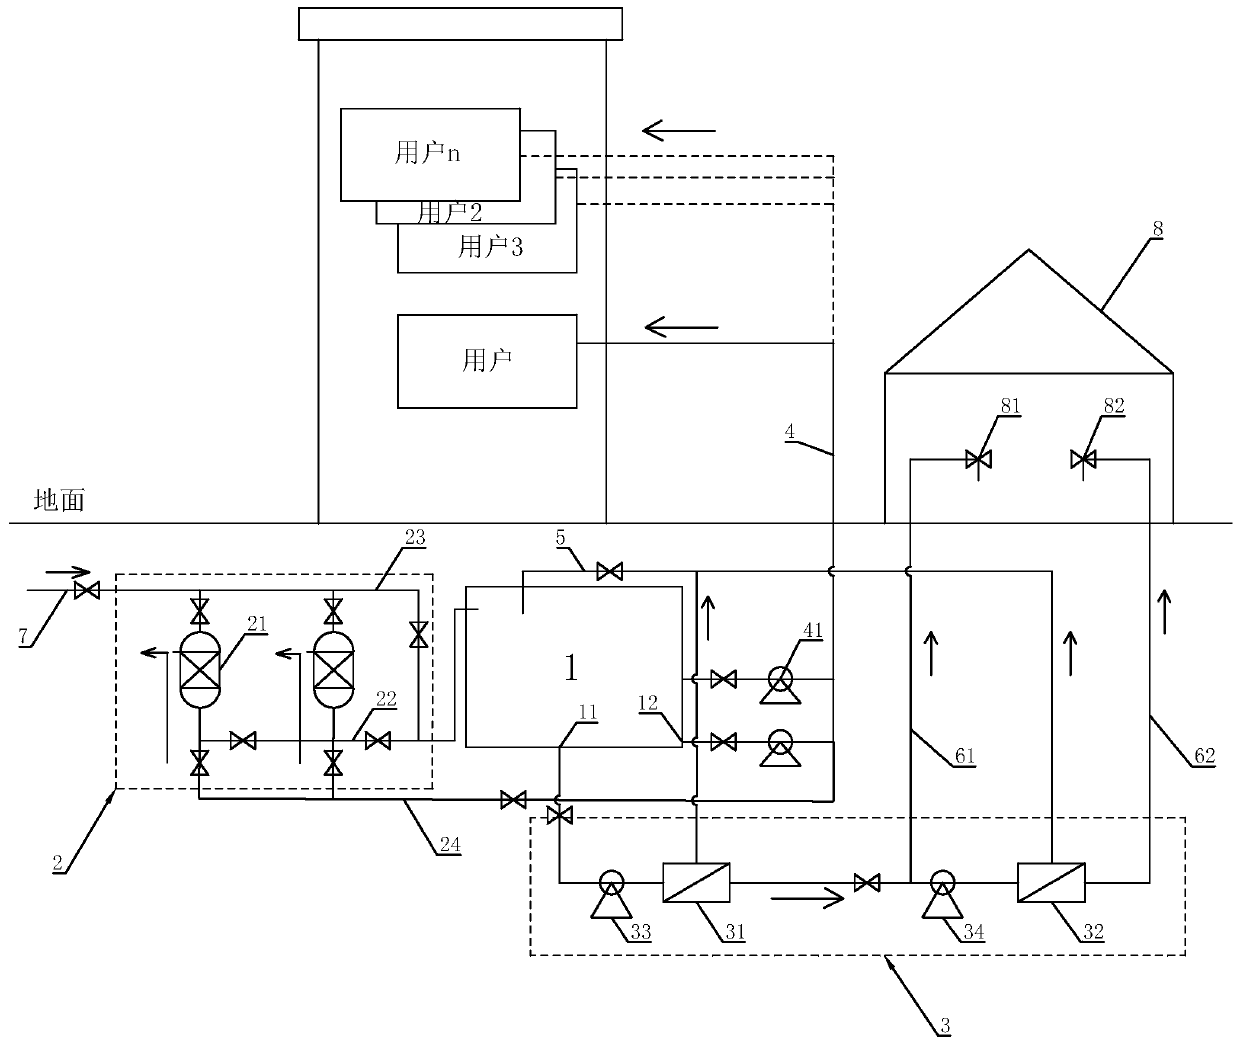 Secondary water supply deep purification system with coupled quality separation function